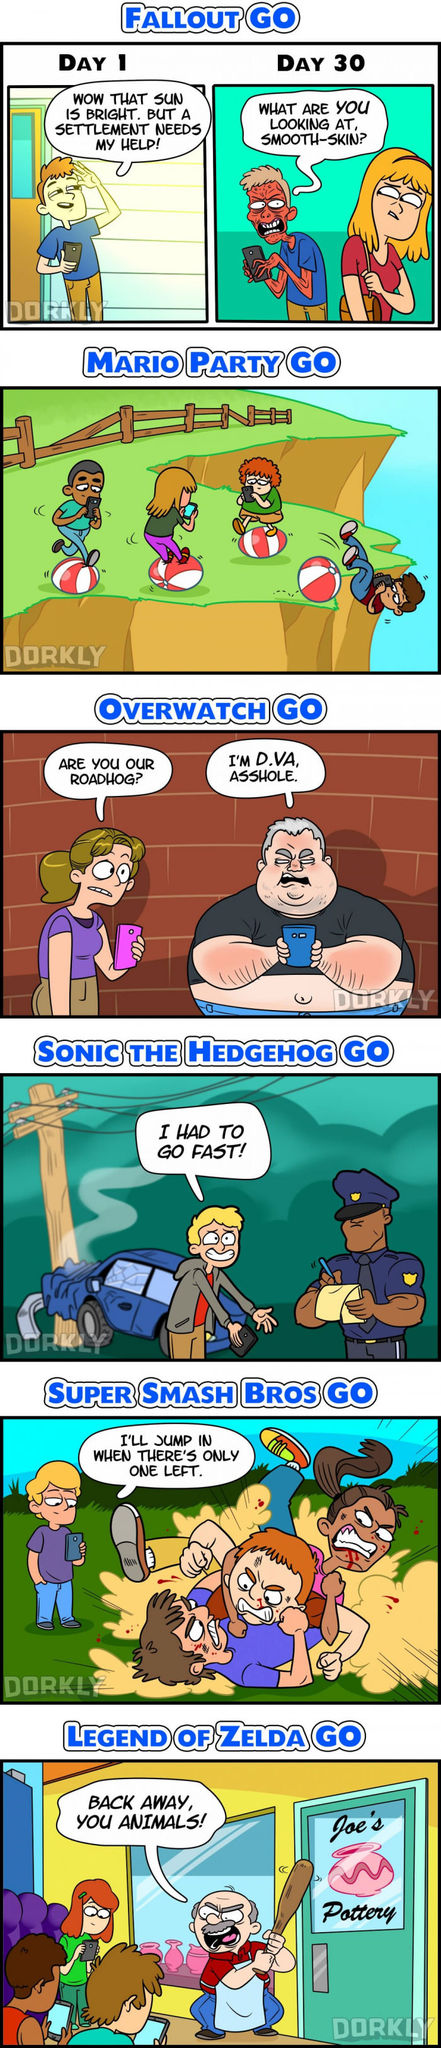 If other Videogames had "GO" versions. - meme